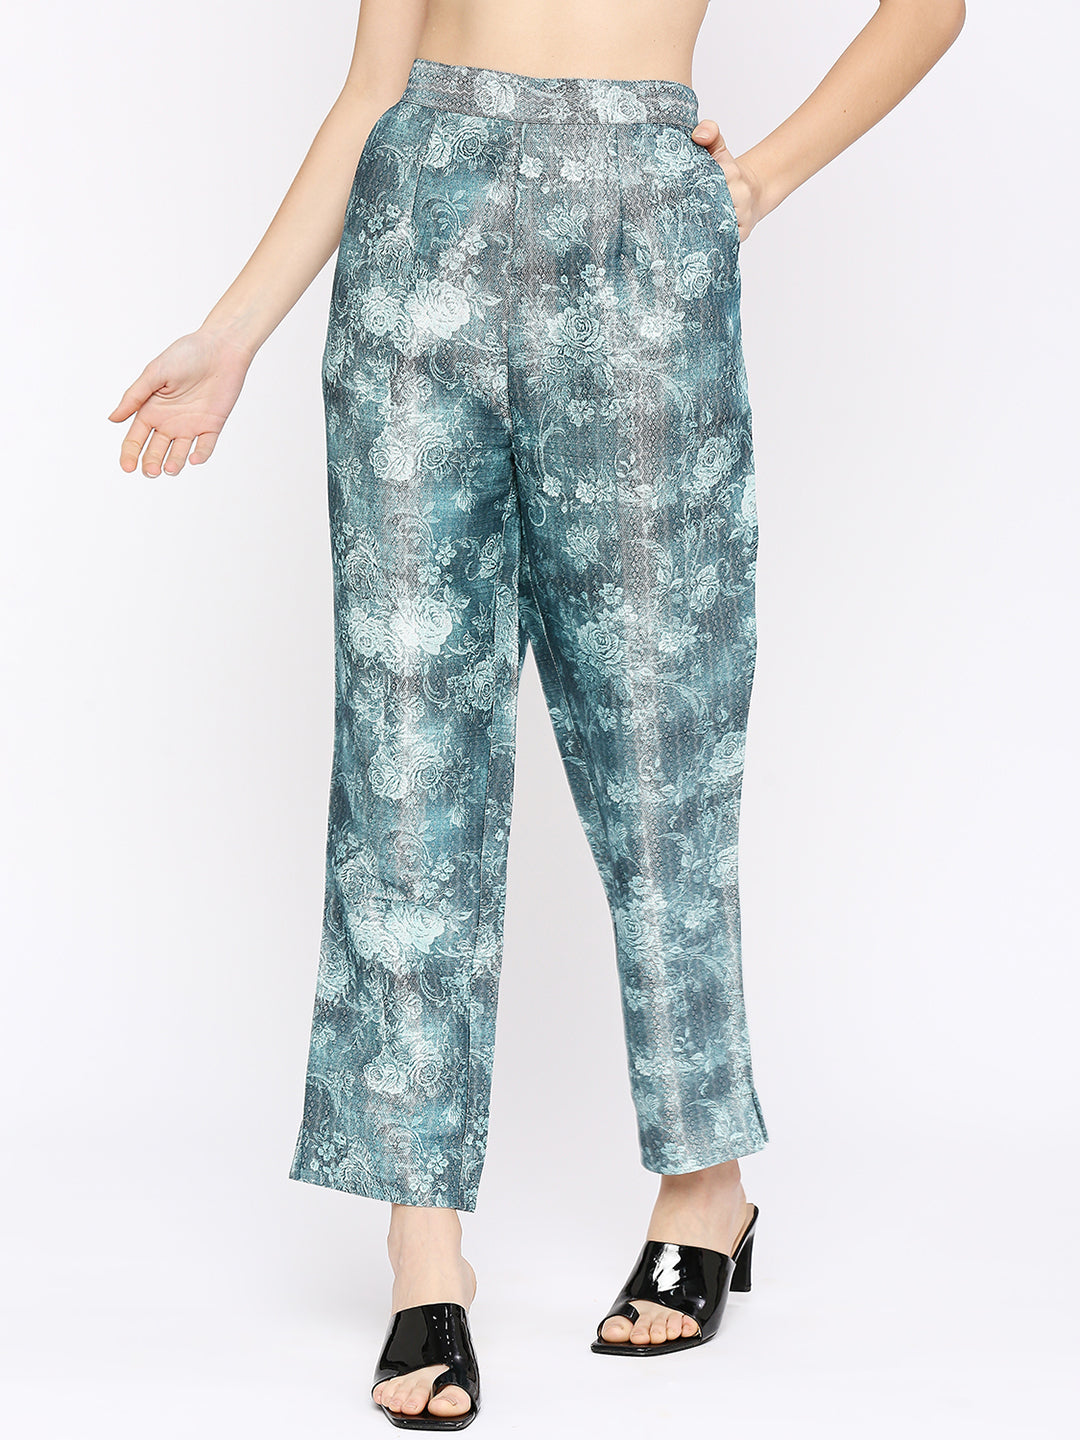 Teal Floral Printed Co-Ord Set With Brocade Pant